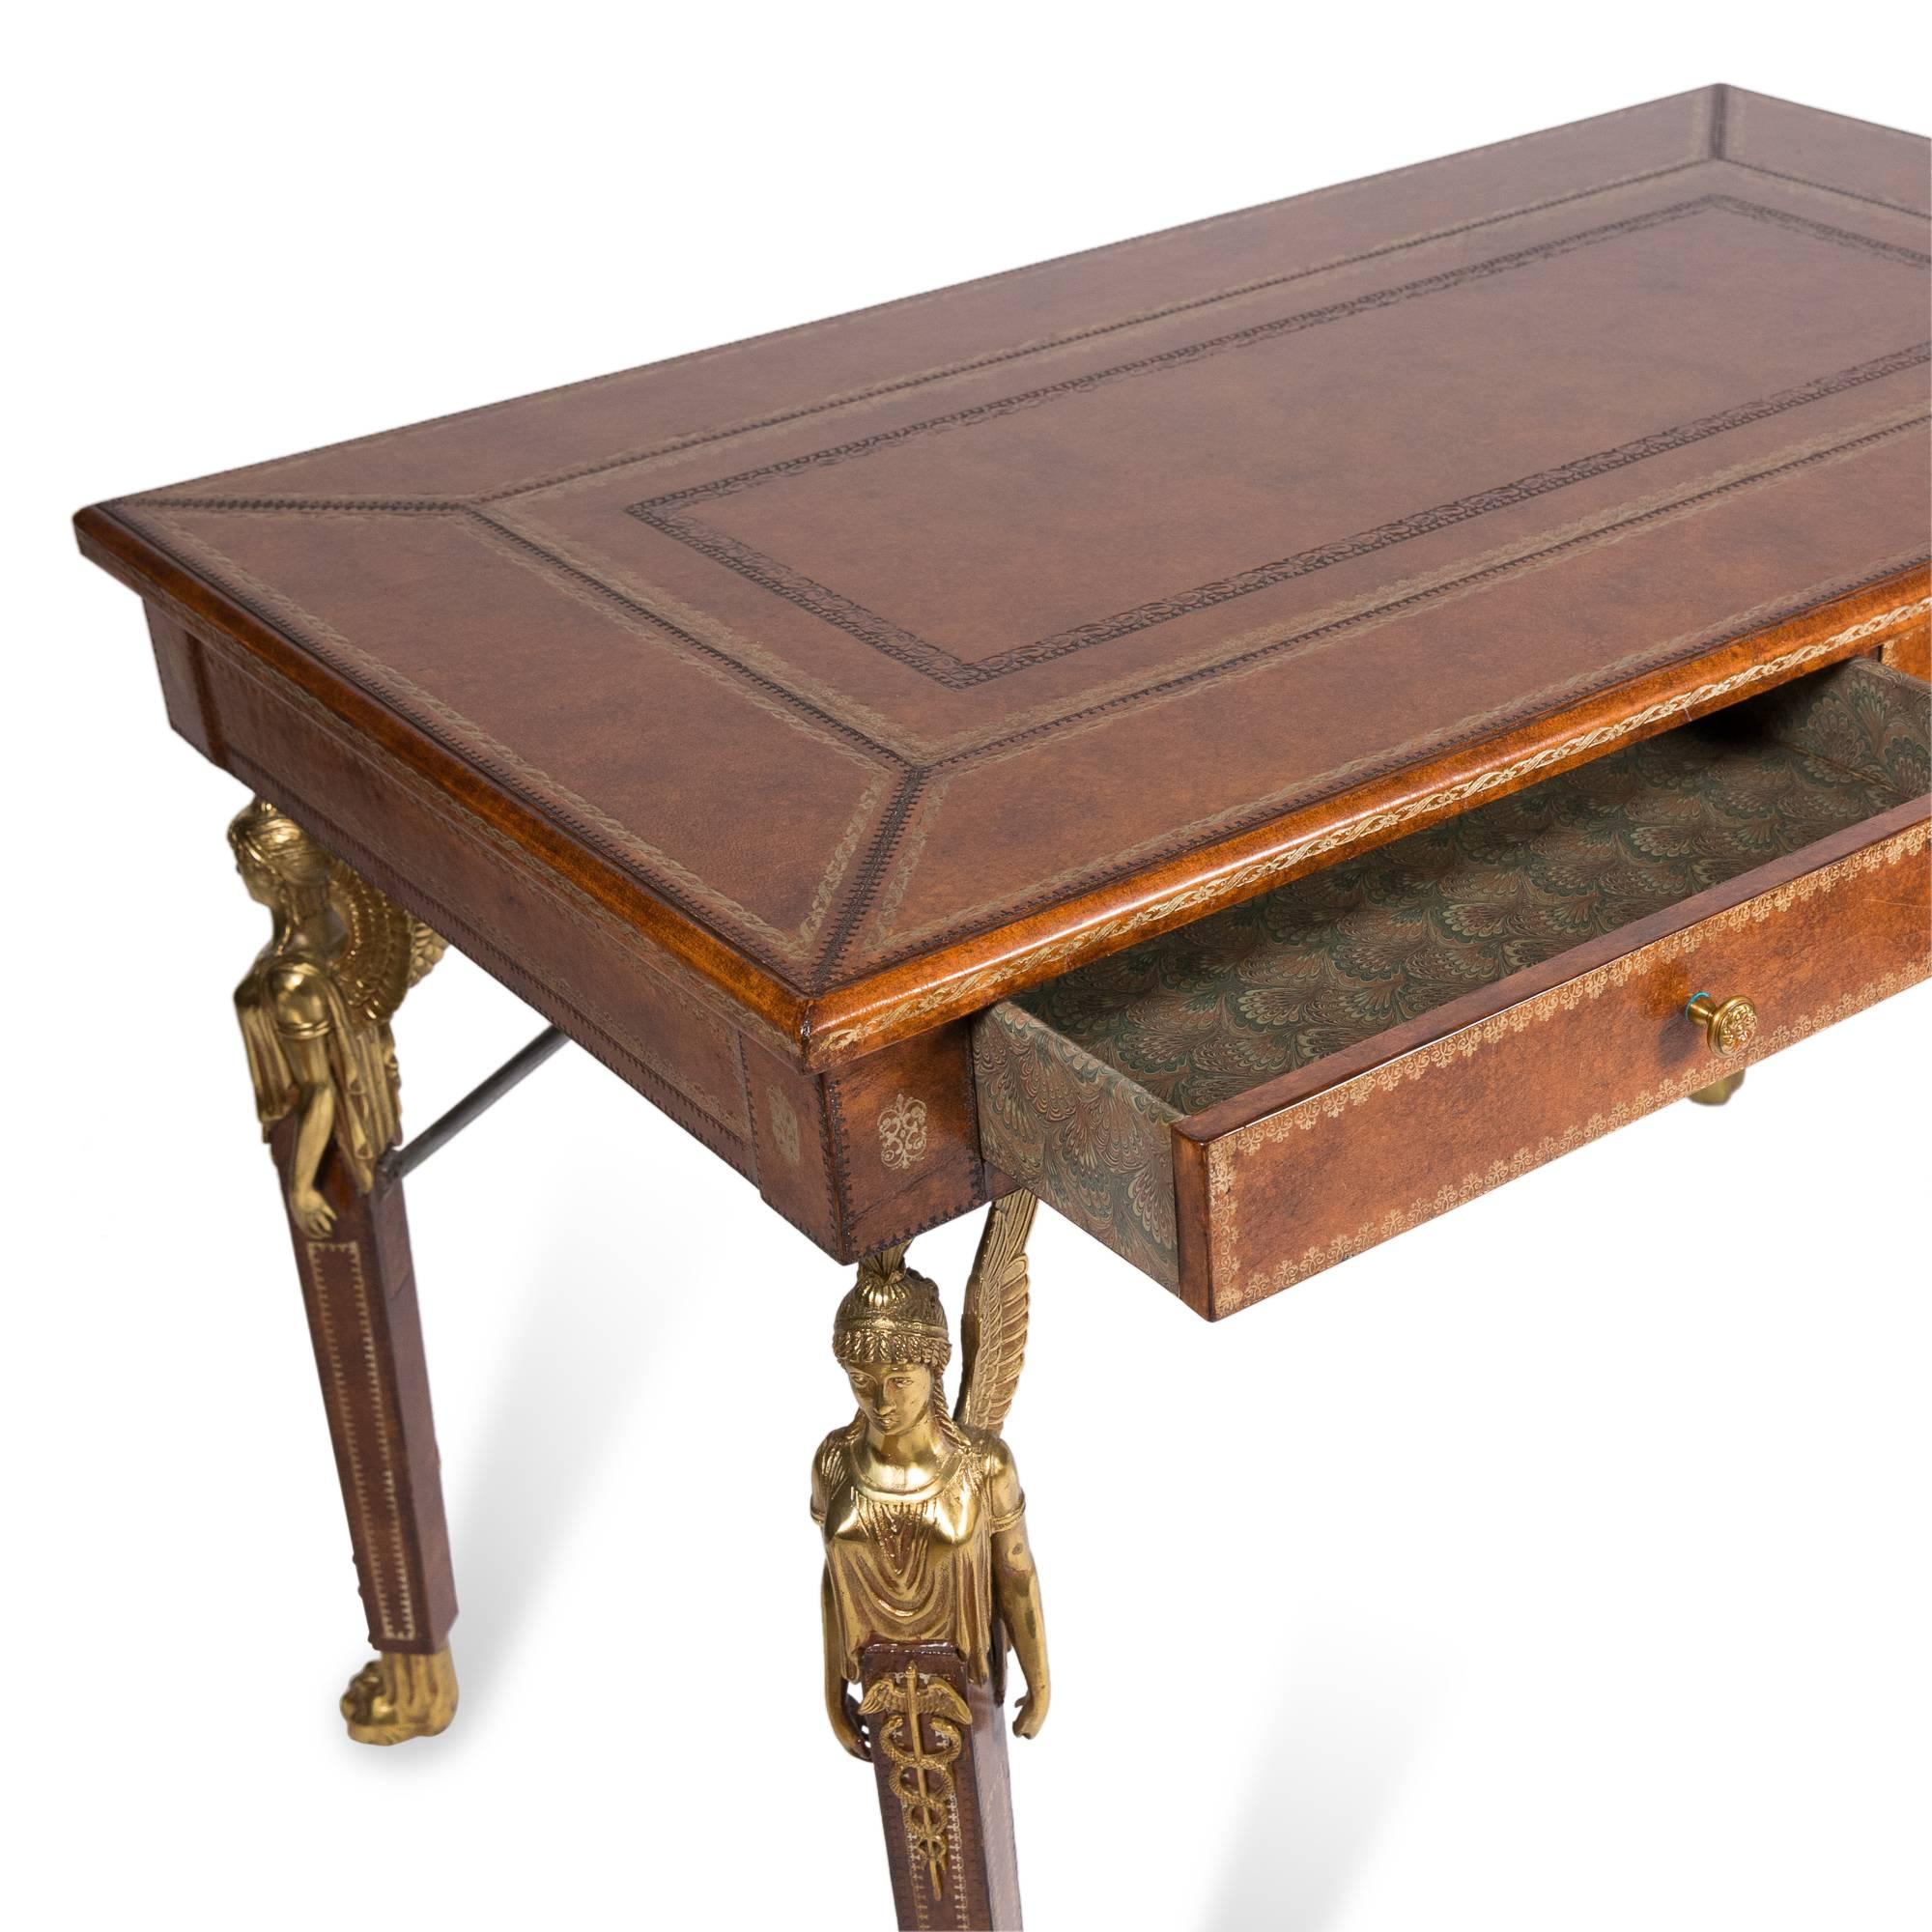 Gilt tooled leather two-drawer desk, with mounted winged solid bronze classical figures on legs, solid bronze paw feet, interior of drawers with scalloped patterned paper lining, by Maitland Smith, United Kingdom 1960s. Measures: Width 43 1/2 in,